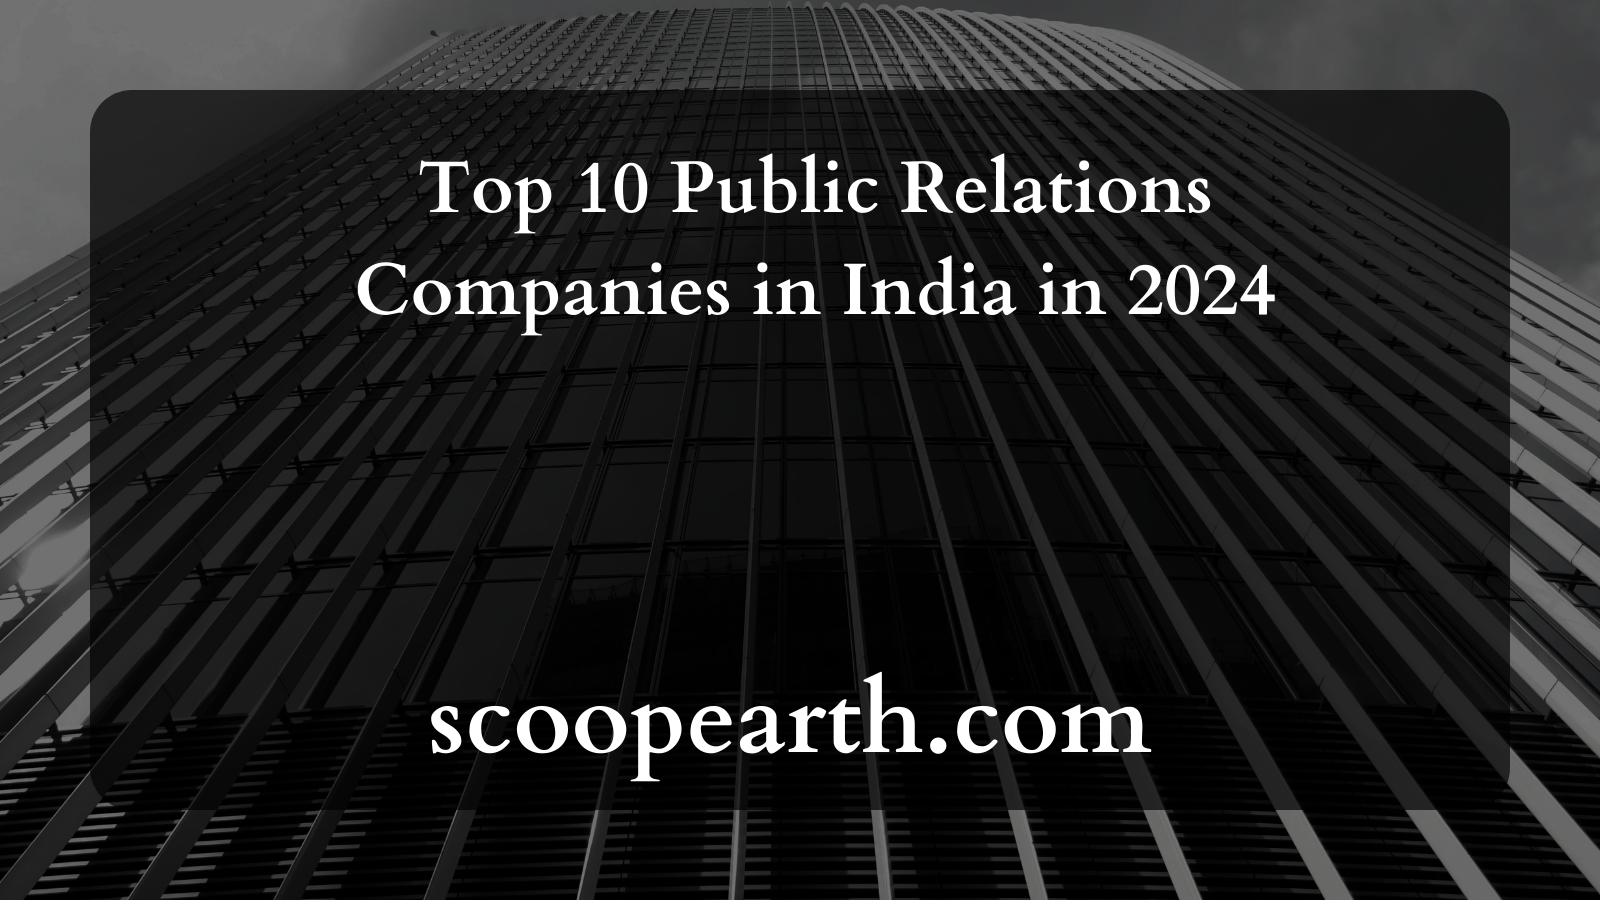 Top 10 Public Relations Companies in India in 2024